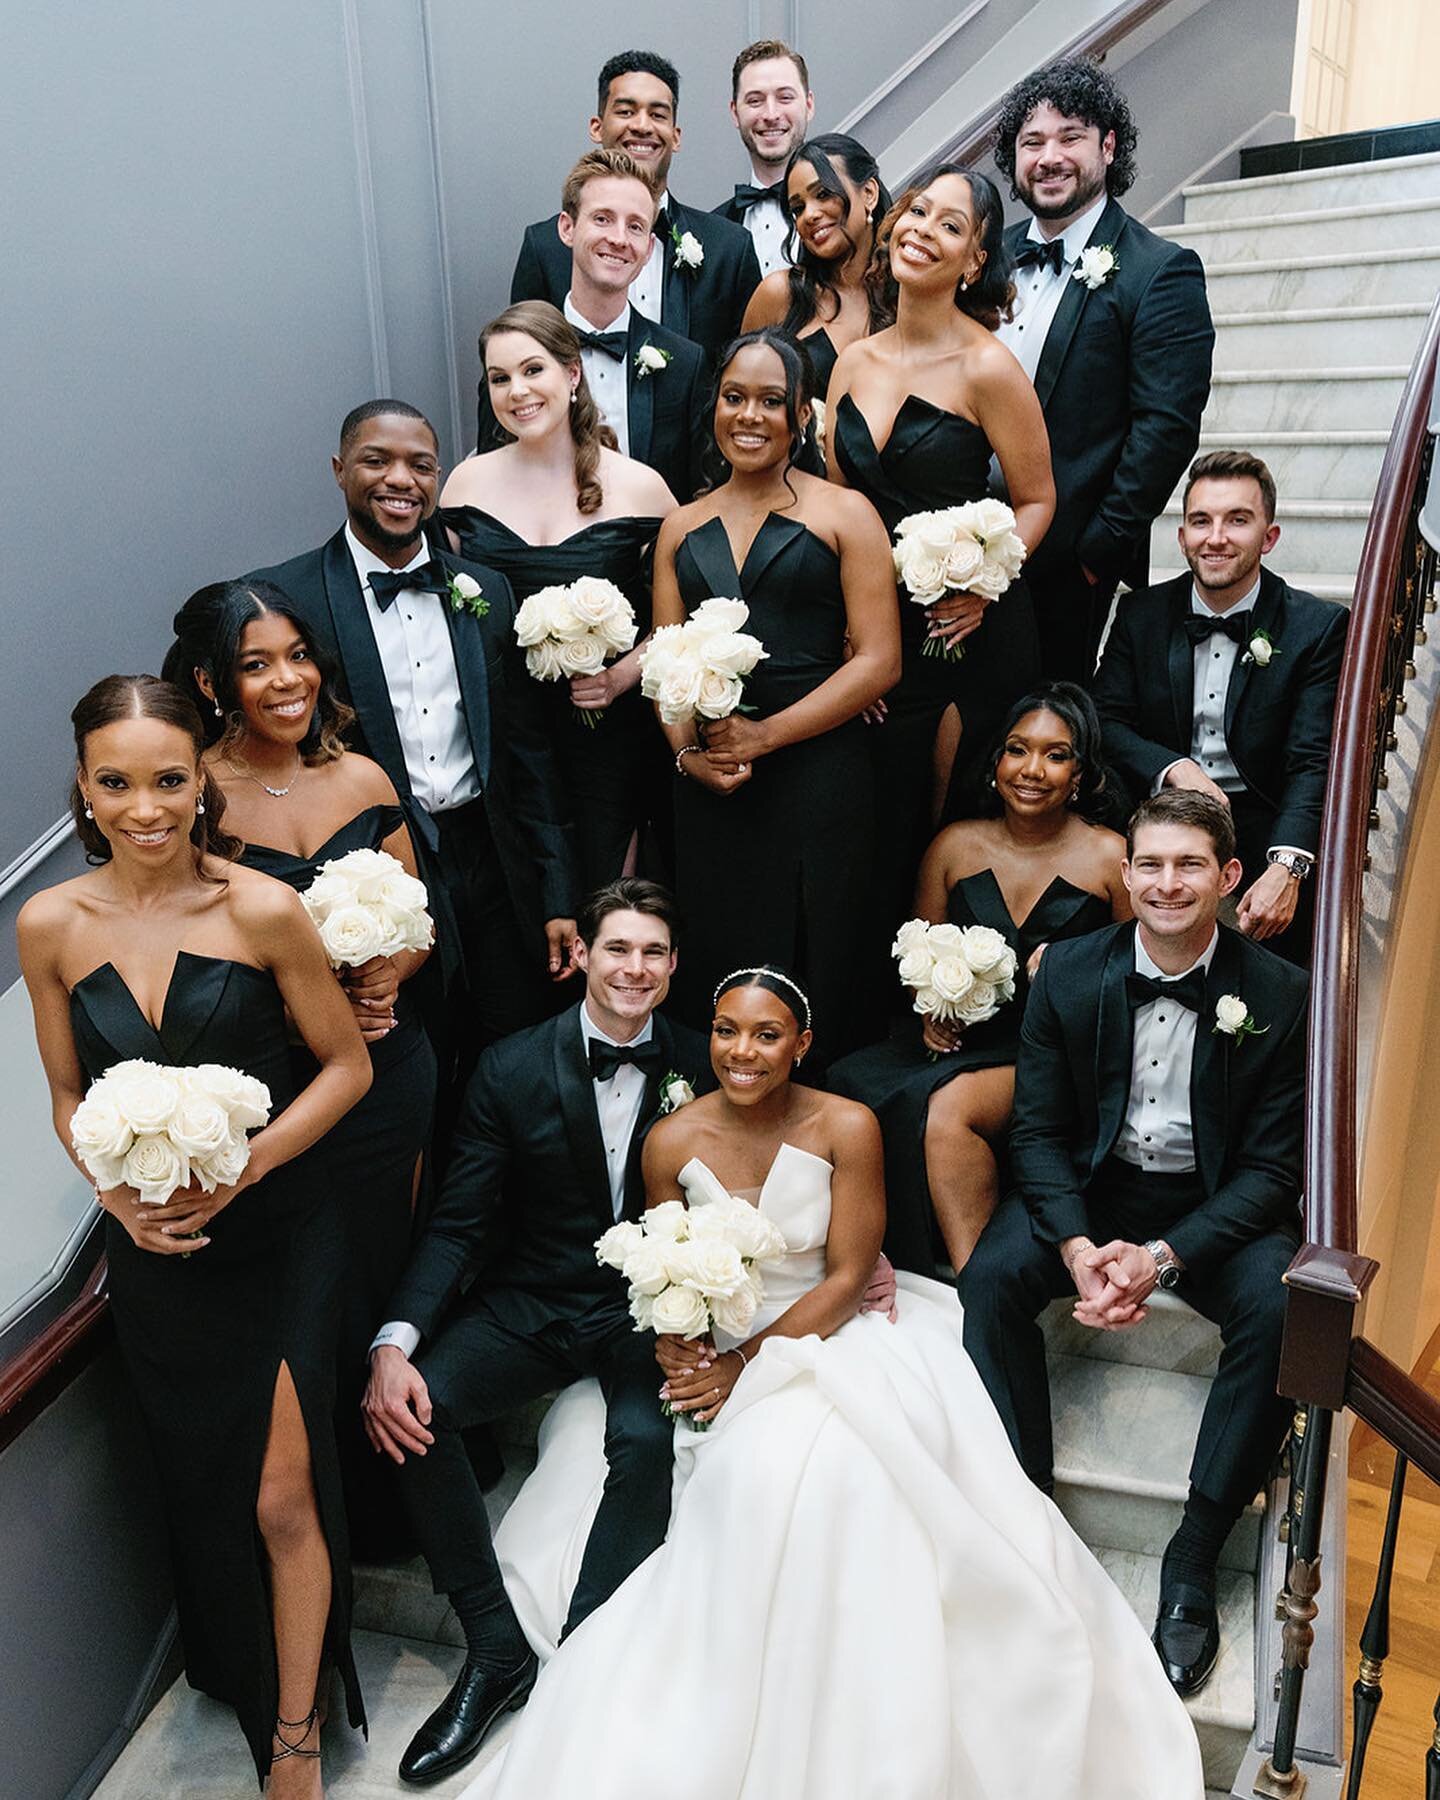 Timeless elegance made possible by this stunning bridal party! 🤍✨

Florals @sophiefelts
Planning and Design @simplybreatheevents
Photography @nikkidaskalakis
Venue, Catering, and Hotel @theschuylerdc @thehamiltondc 
Videography @sok.vision
Hair @tre